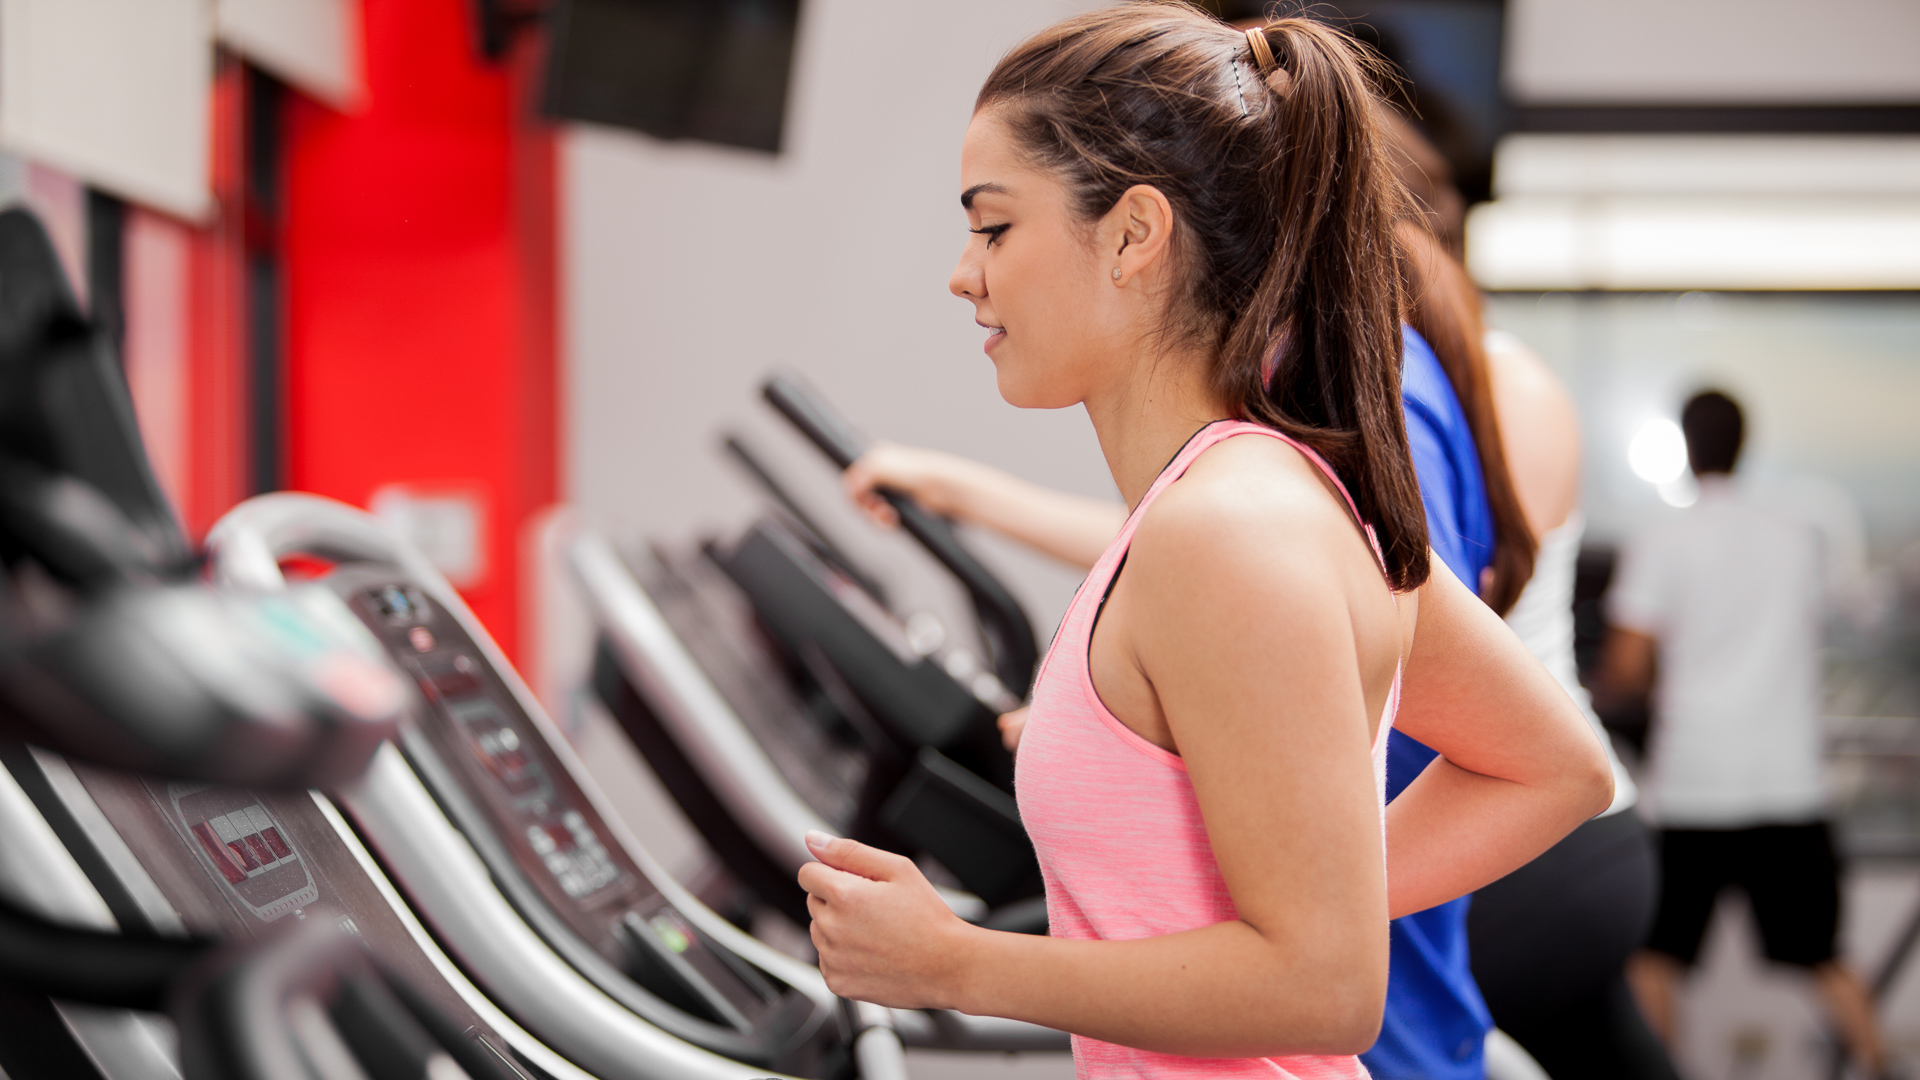 Do we need a health check-up before signing for a gym membership?